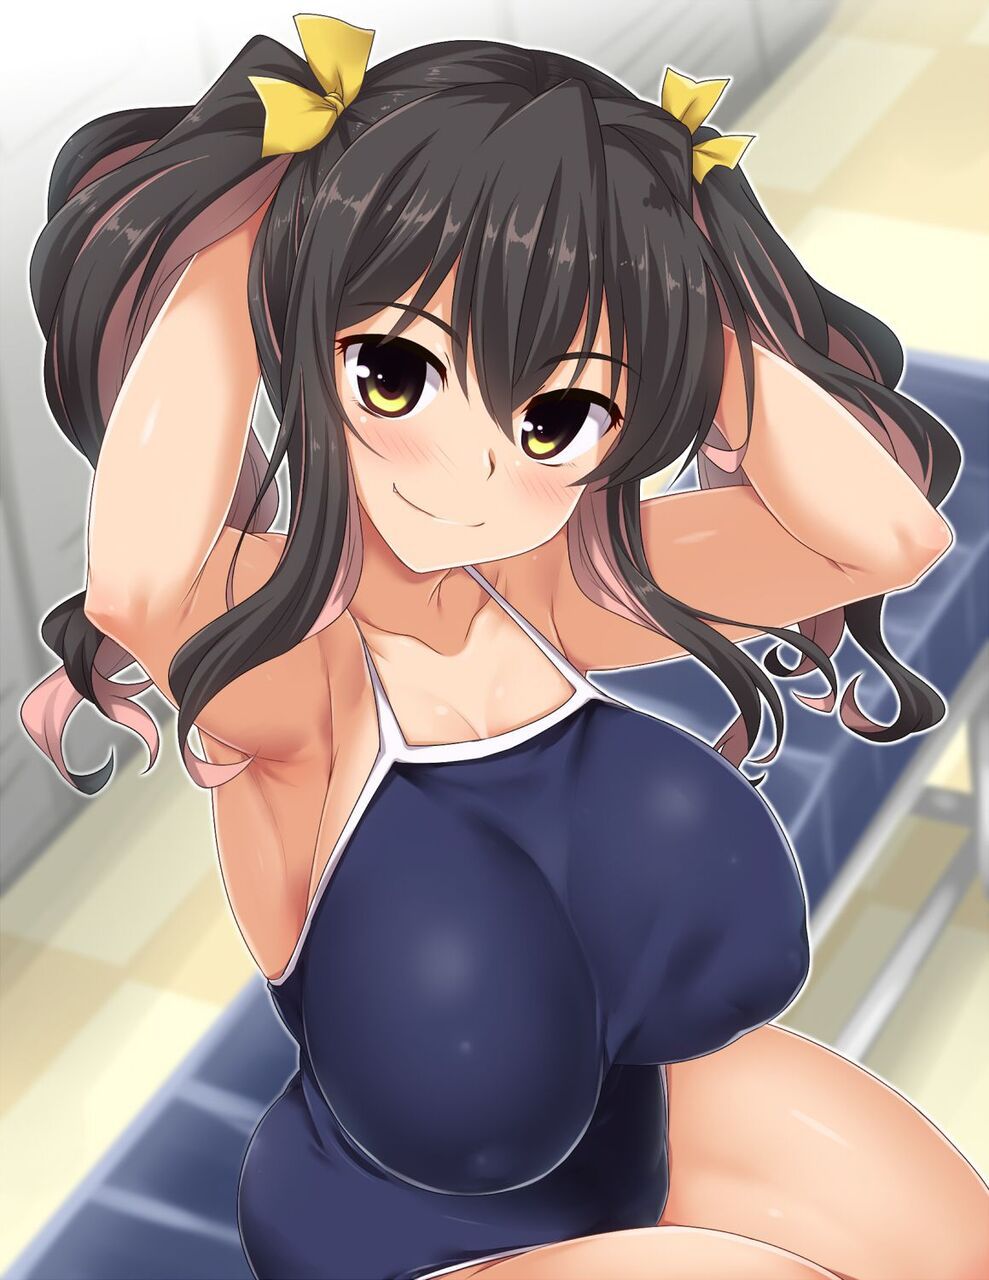 【Sukusui】Please get an image of a sukusui girl who looks good in the dazzling sun 6